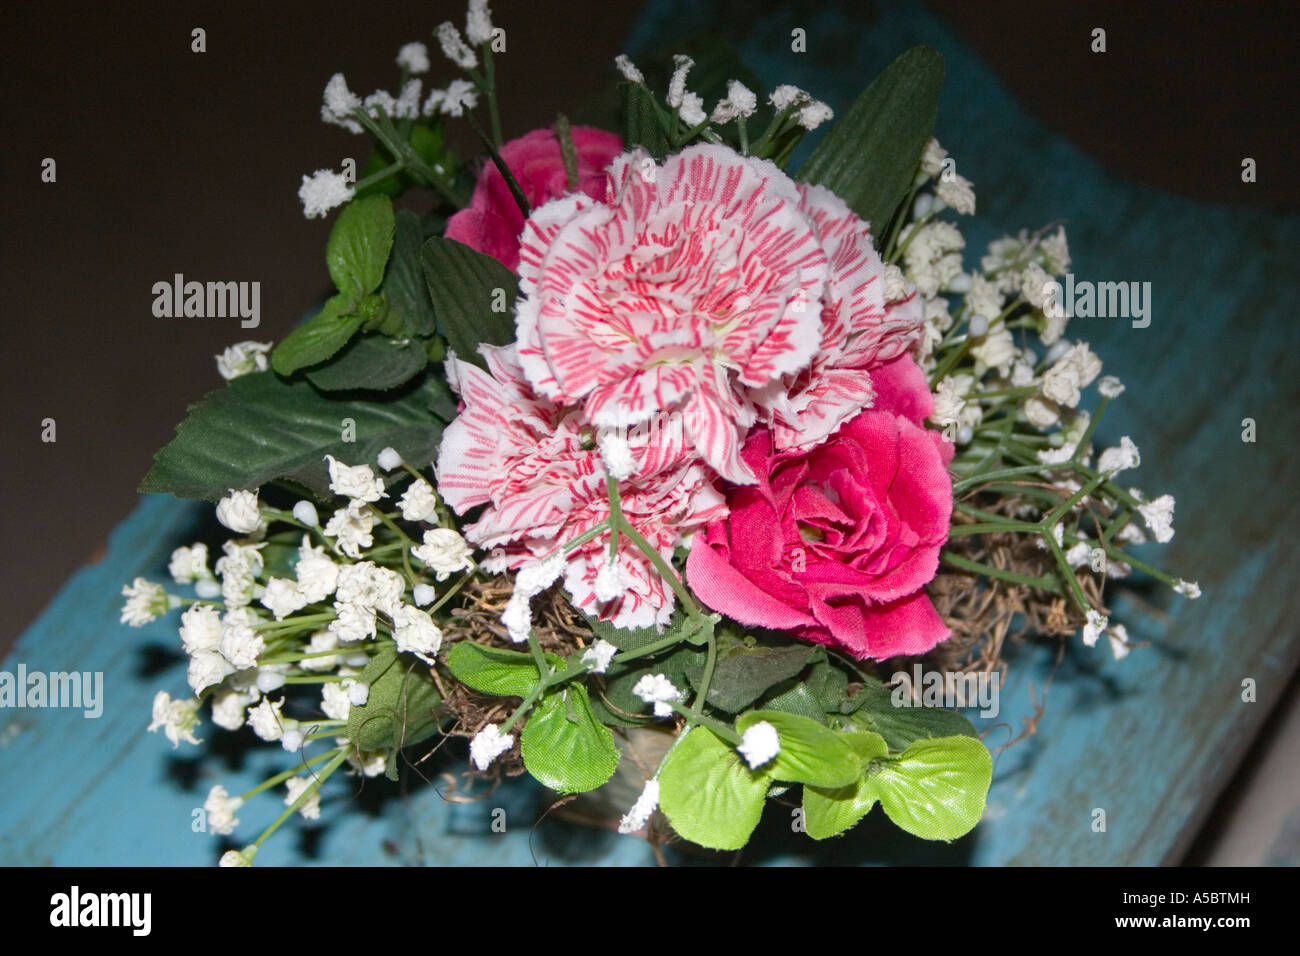 Artificial bouquet of carnation and rose flowers sitting on deck bench. Plymouth Minnesota USA Stock Photo